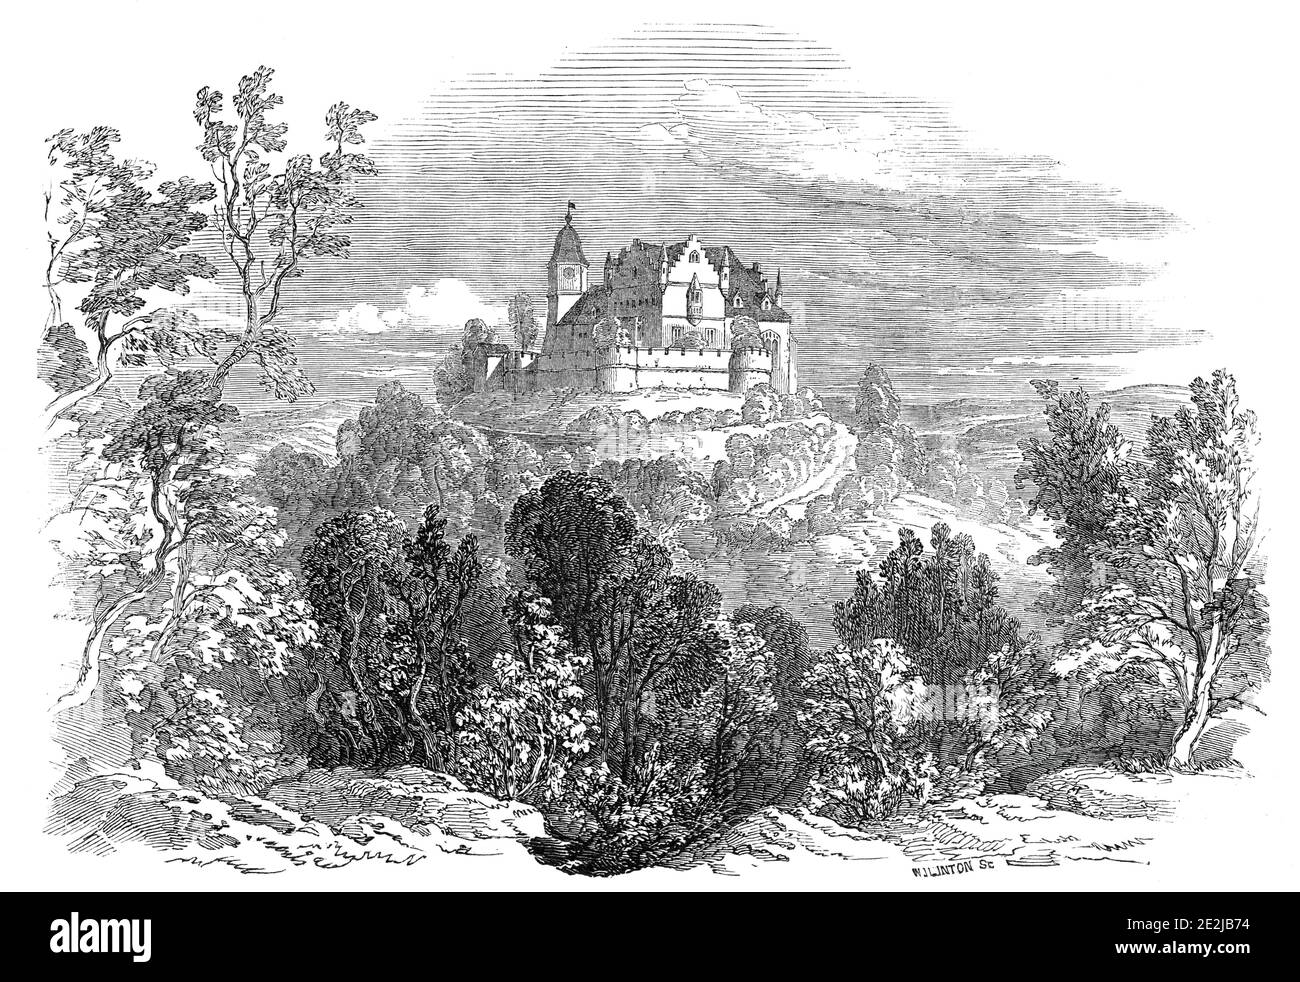 Schloss Kalenberg - from His Royal Highness Prince Albert's drawing, 1845. View of Callenberg Castle near Coburg, Germany. It is the principal residence of the House of Saxe-Coburg and Gotha of which Prince Albert was a member. From &quot;Illustrated London News&quot;, 1845, Vol VII. Stock Photo